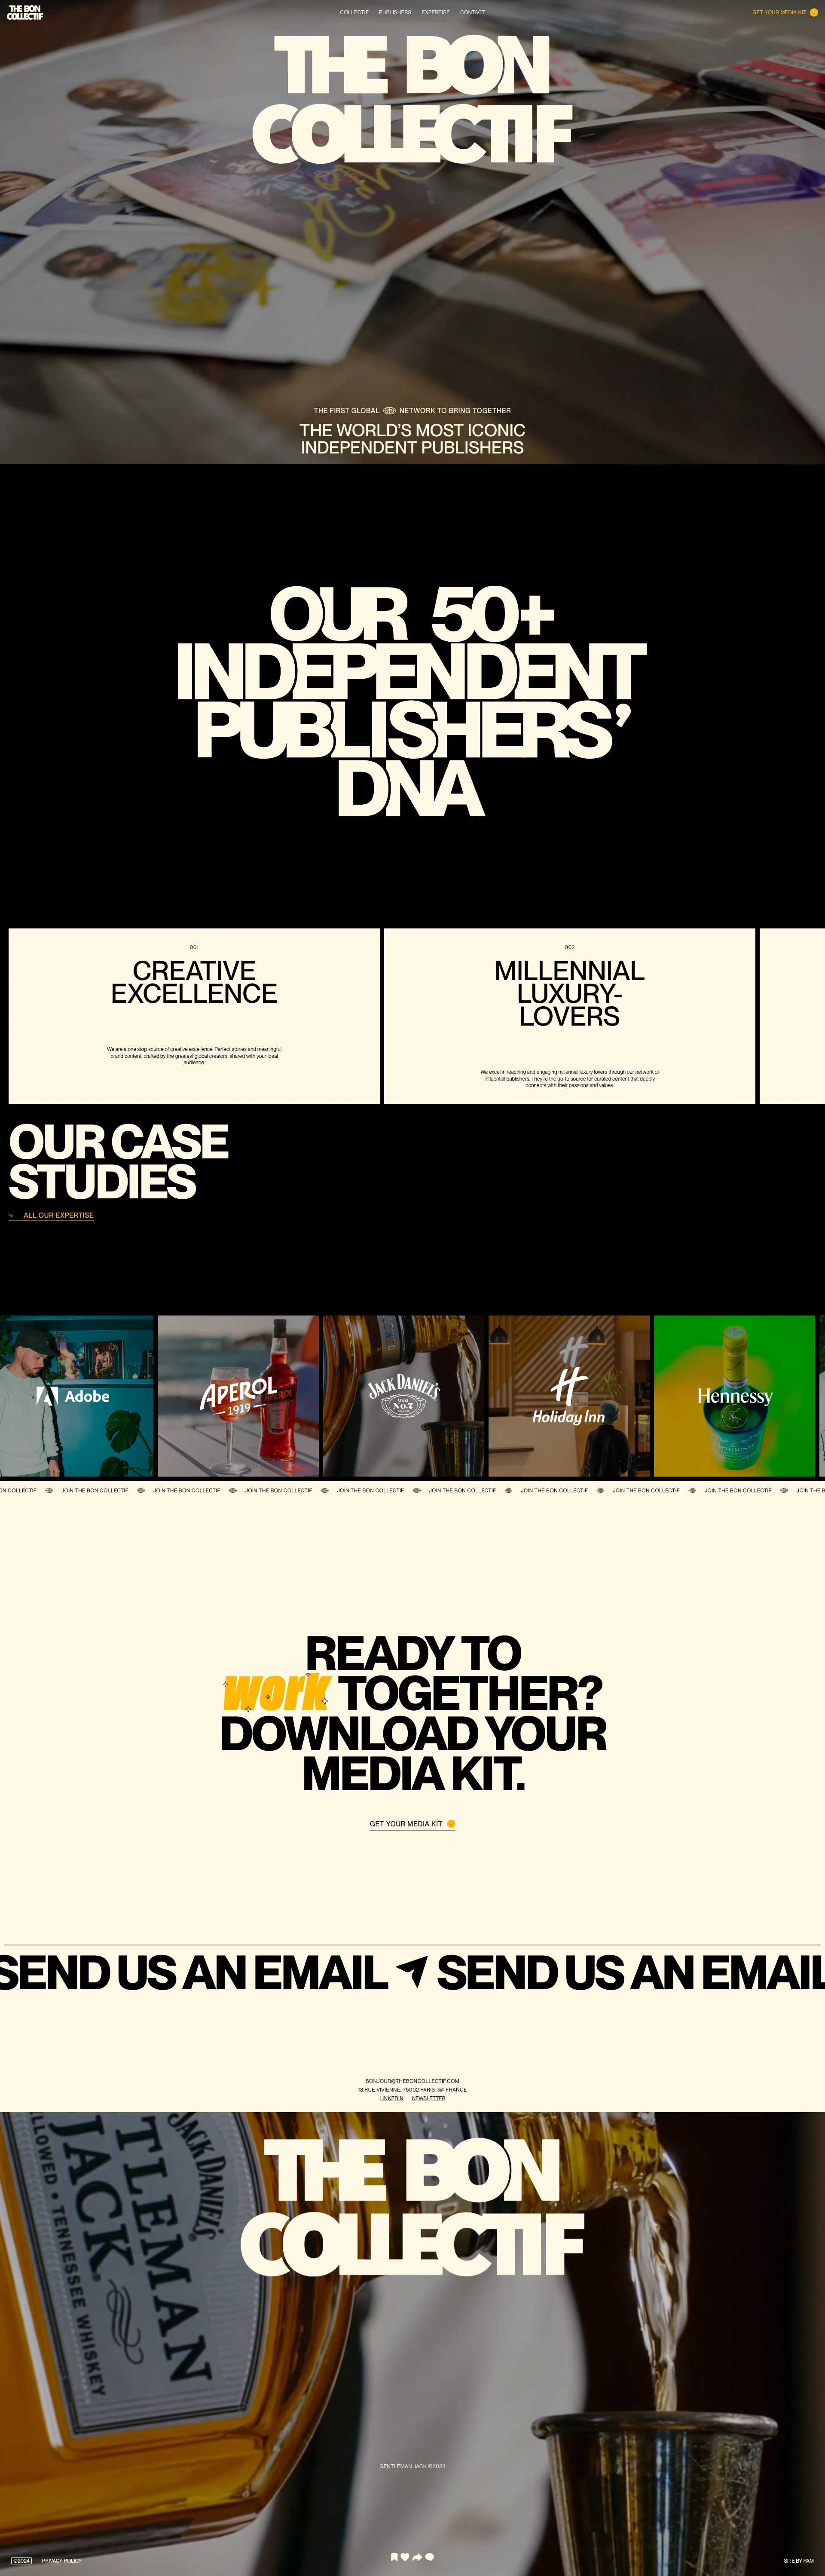 The Bon Collectif Landing Page Example: The Bon Collectif is the first global network to bring together the world's most iconic independent publishers. A one global space to reach and engage with youth audience through their passions.